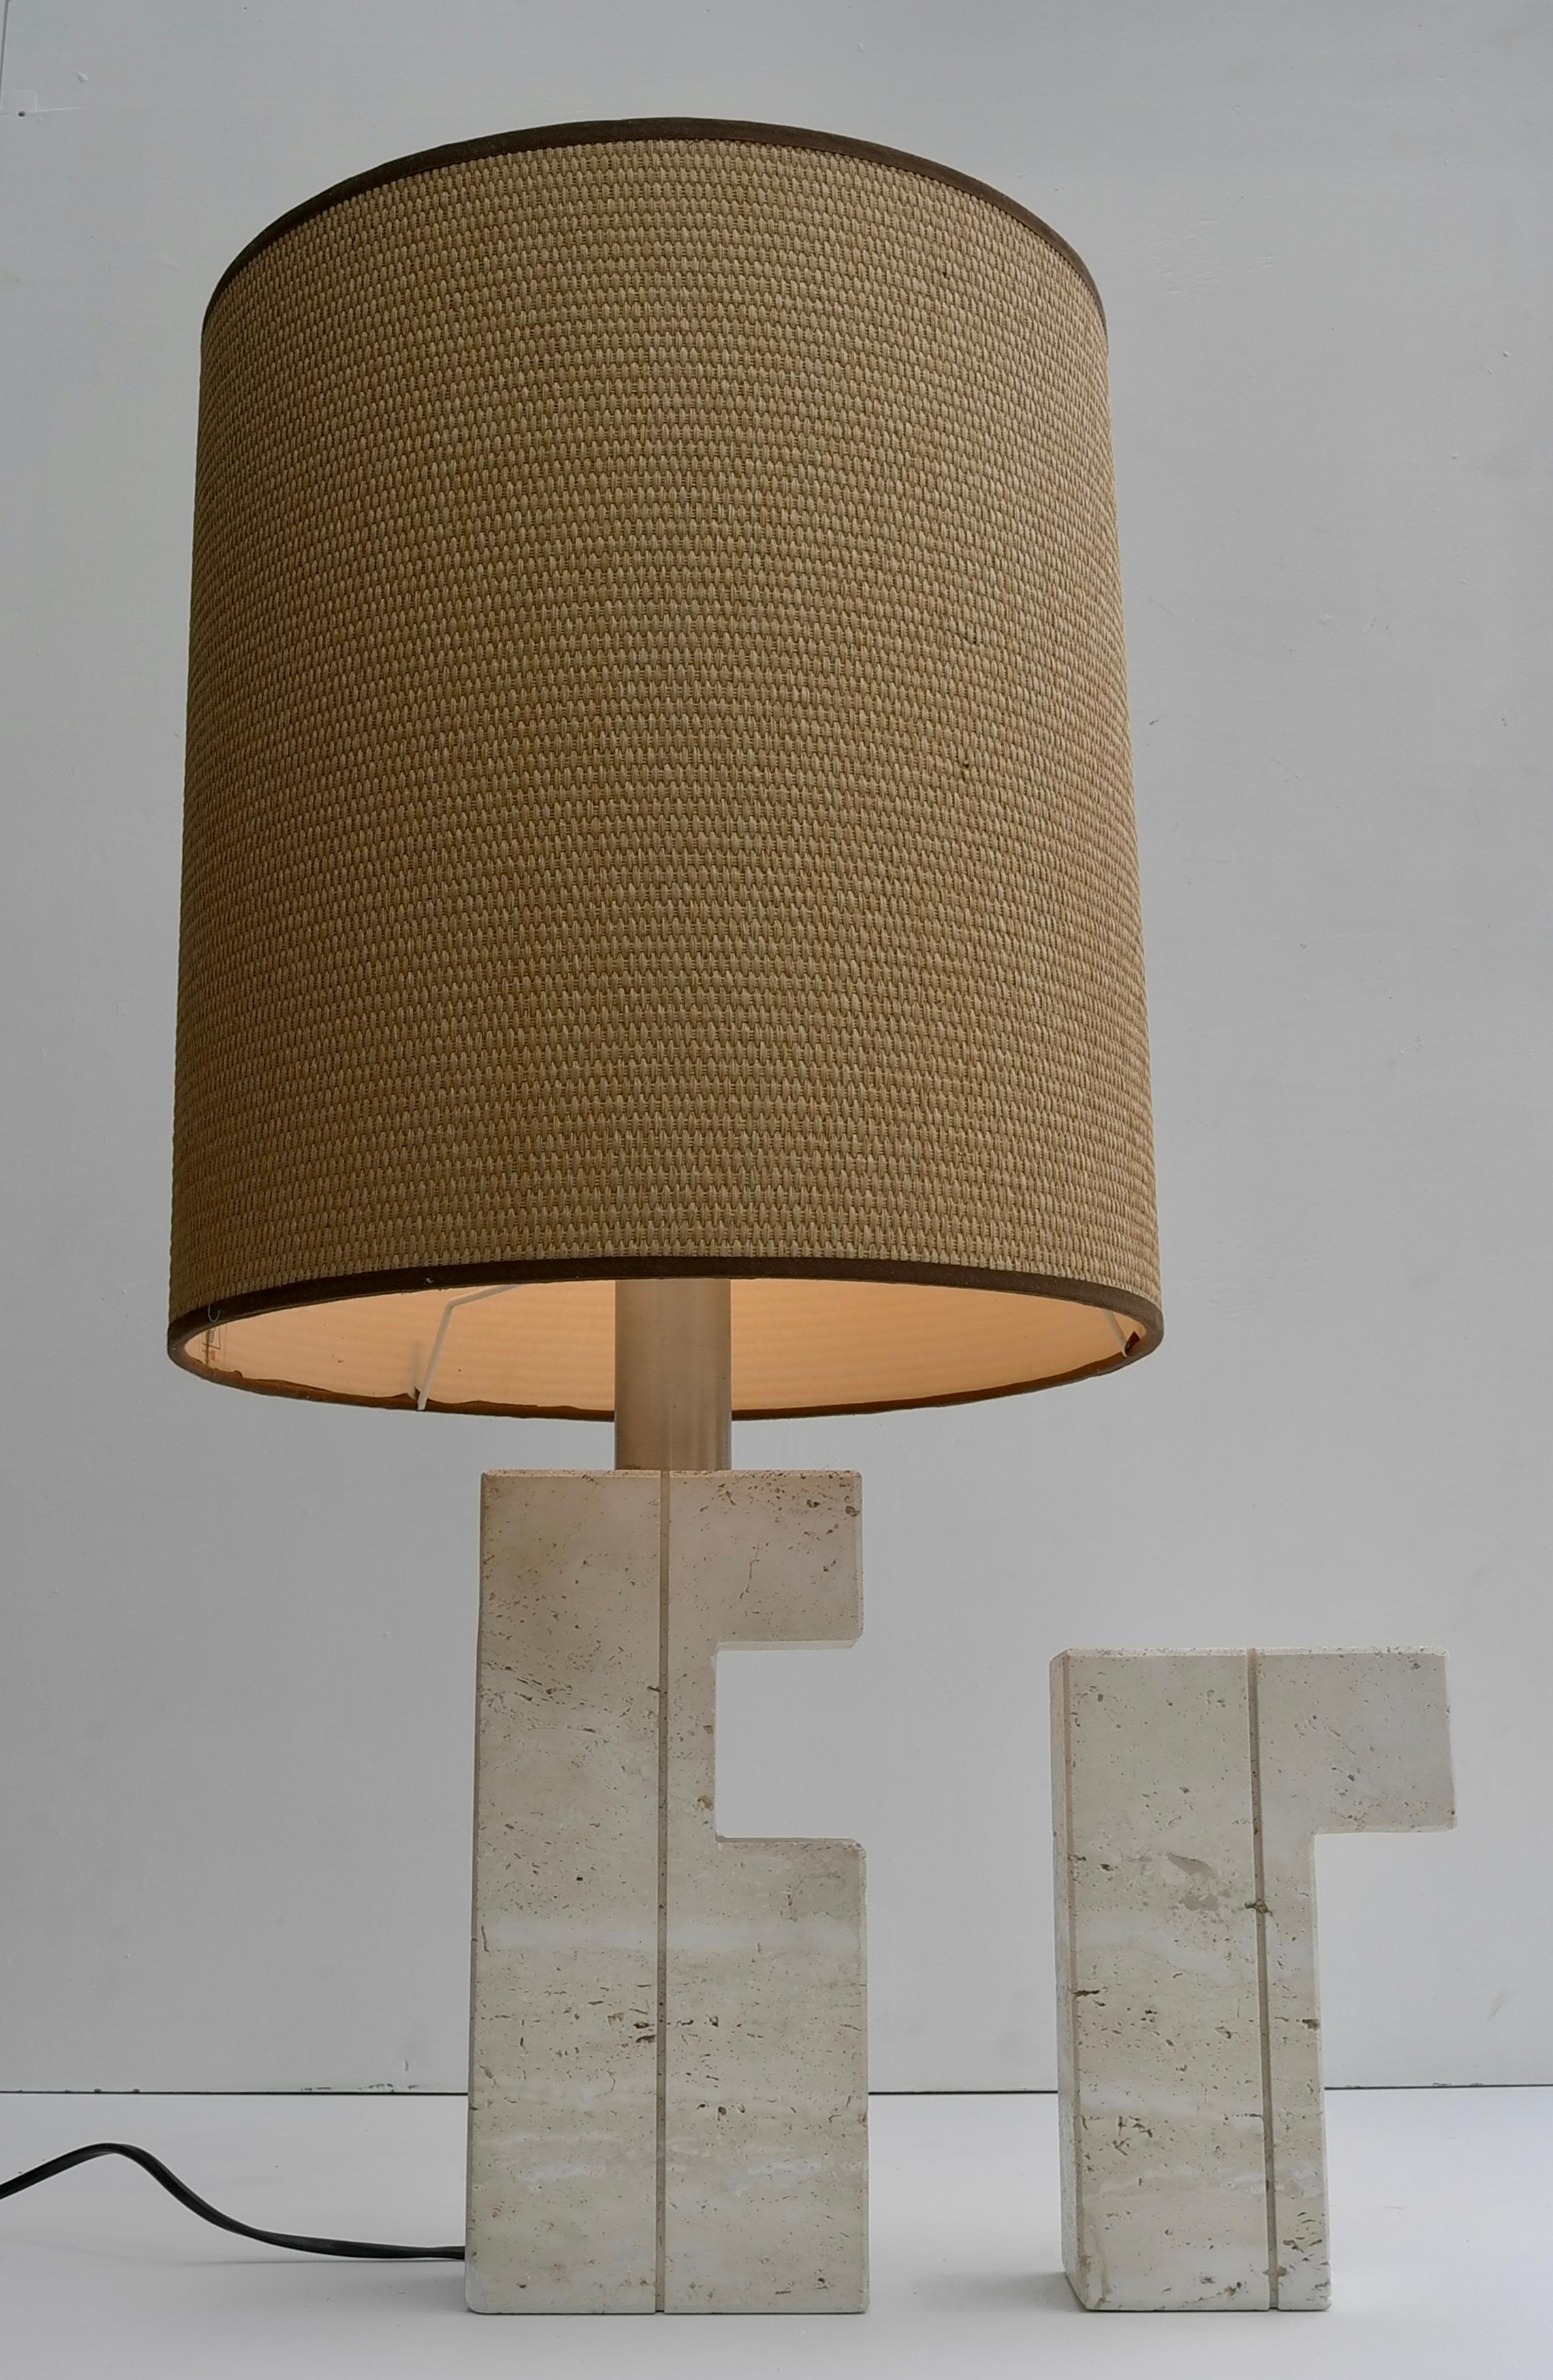 Large Sculptural Travertine Table Lamp, France 1970's For Sale 1